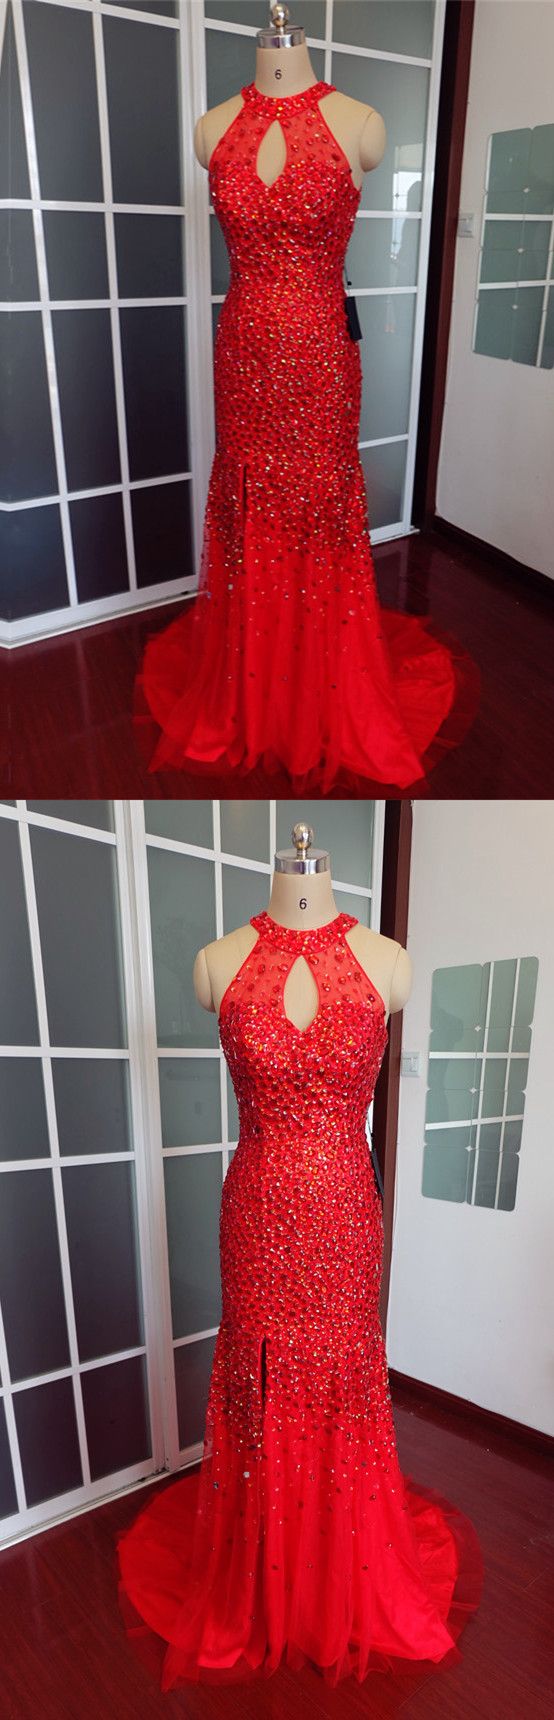 Luxurious Red Crystal Beaded Mermaid Hater Prom Dresses Long Tulle Leg Split Evening Gowns, Custom Made Women Party Dresses, Wedding Guest Gowns